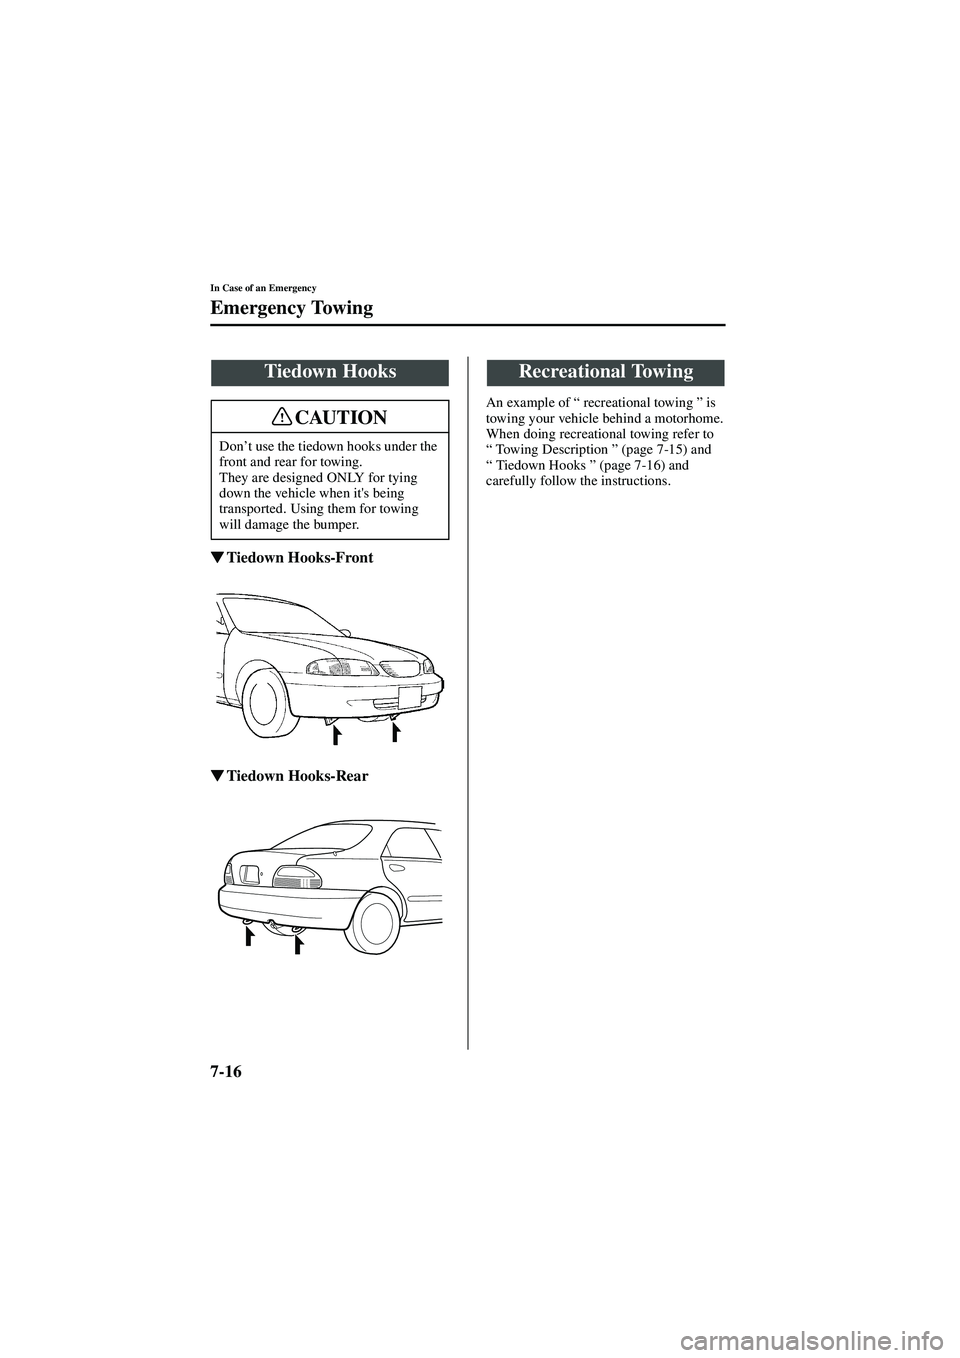 MAZDA MODEL 626 2002  Owners Manual 7-16
In Case of an Emergency
Emergency Towing
Form No. 8Q50-EA-01G

  Tiedown Hooks-Front


 Tiedown Hooks-Rear
An example of  “ recreational towing  ” is 
towing your vehicle behind a mot